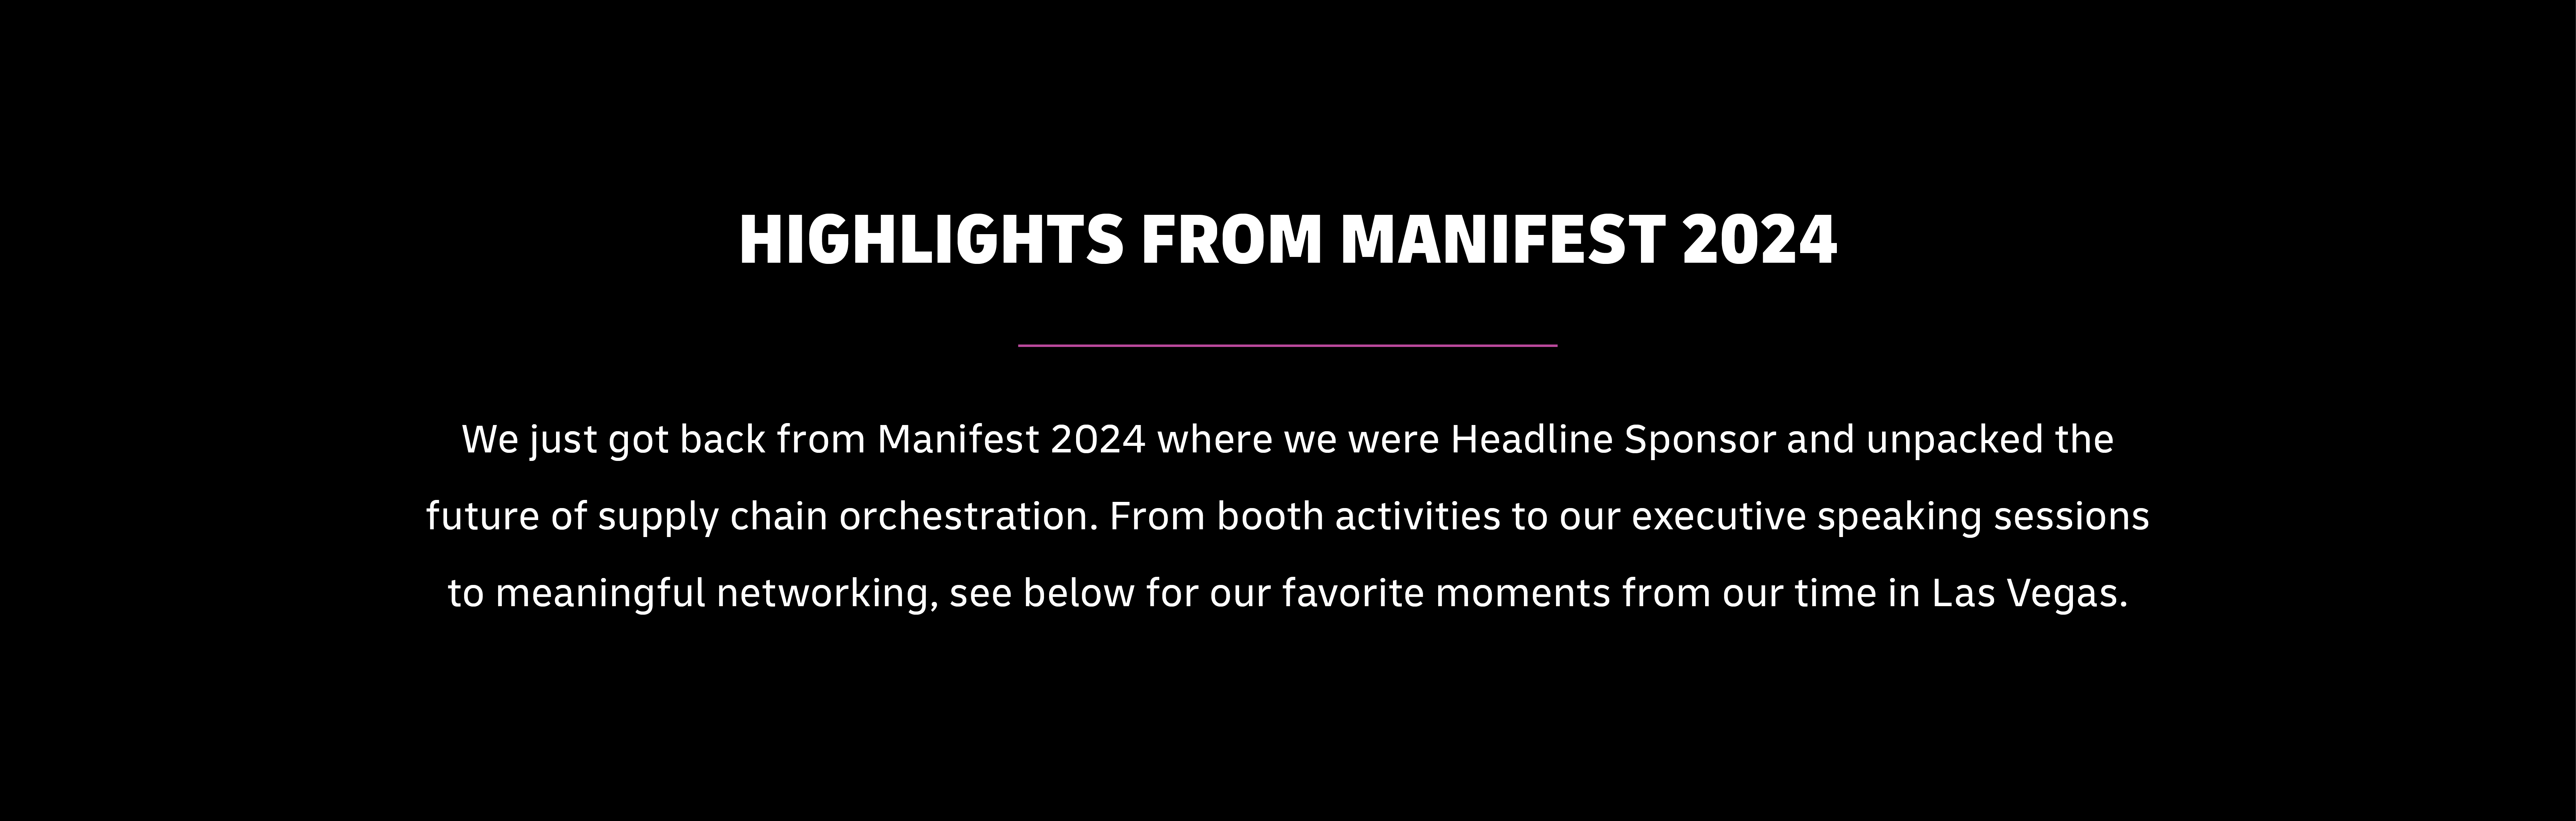 Highlights from Manifest 2024 Banner